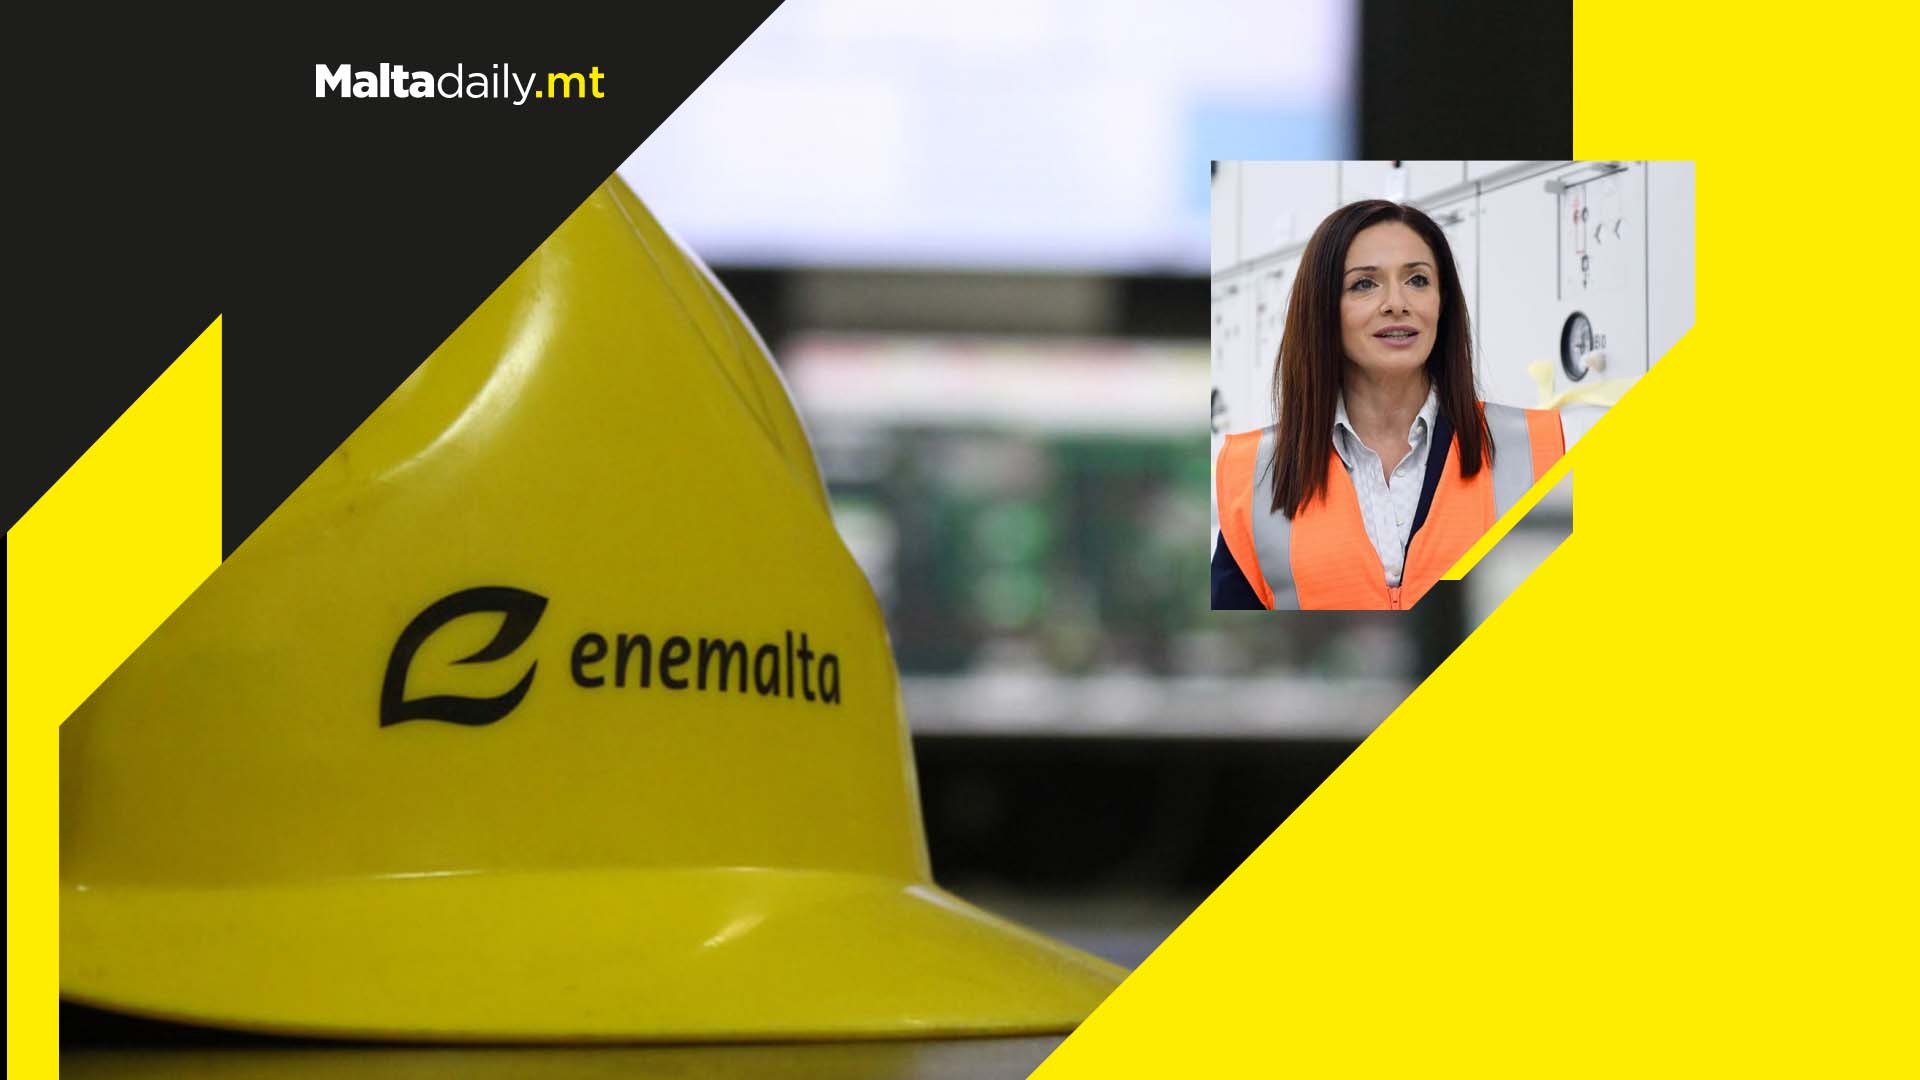 Gas prices secured by Malta as Enemalta signs new deal